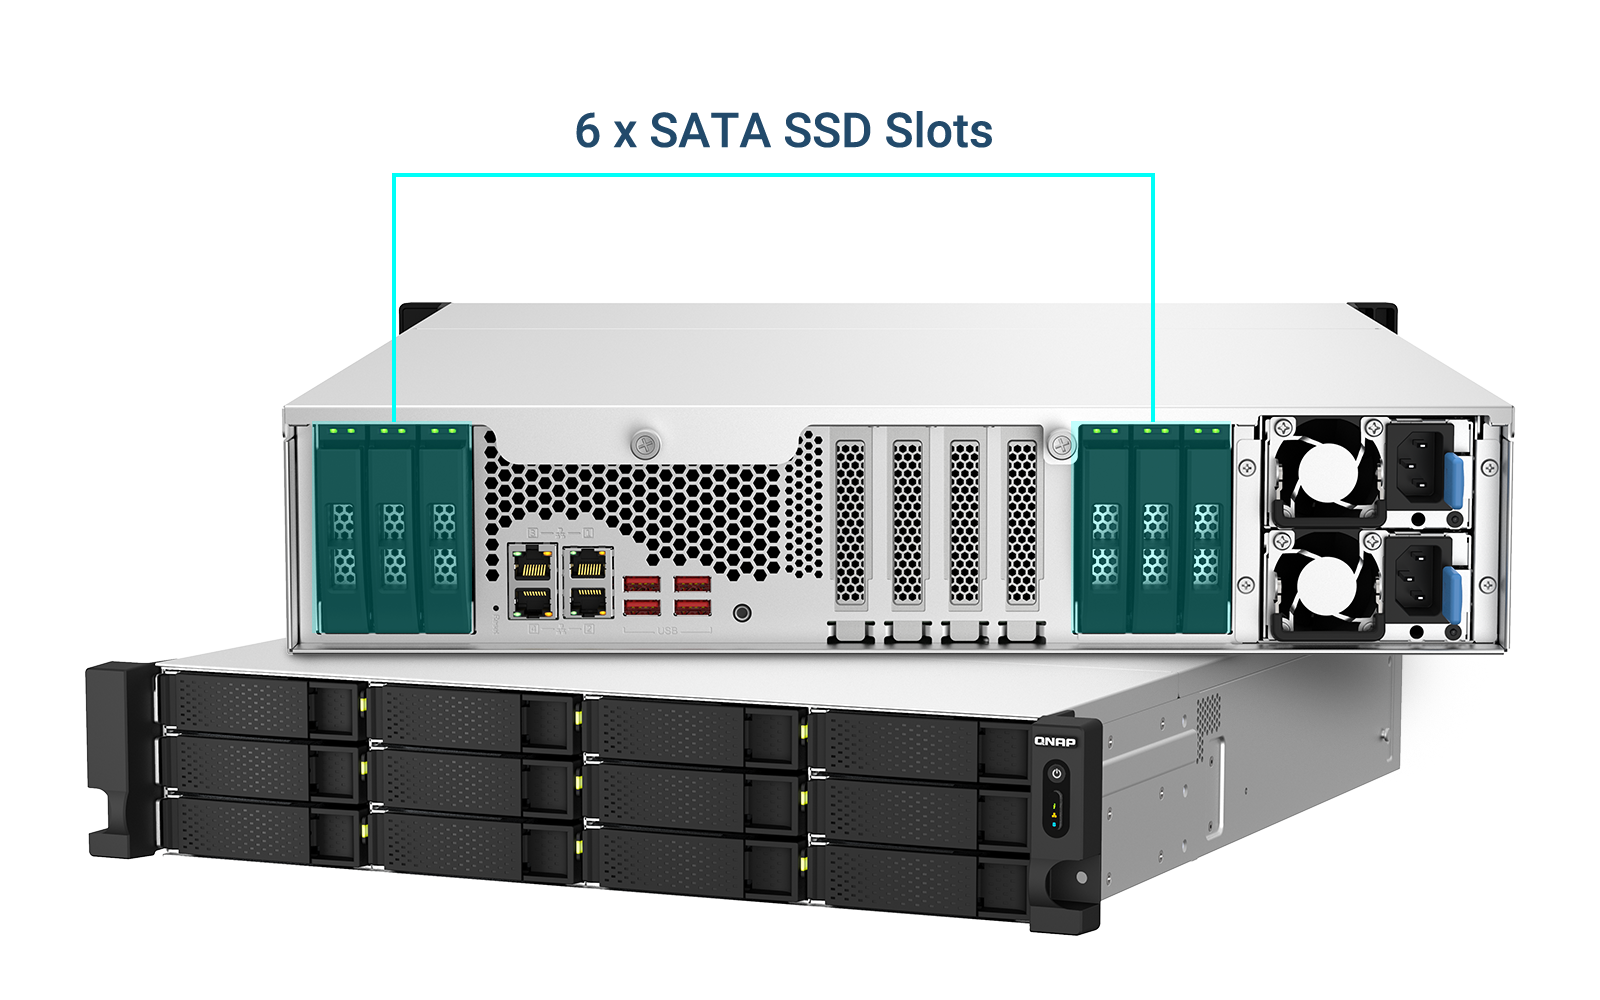 QNAP TS-h1887XU-RP Powerful 10GbE-ready hybrid storage with PCIe Gen 4 expandability supporting QuTS hero or QTS operating system